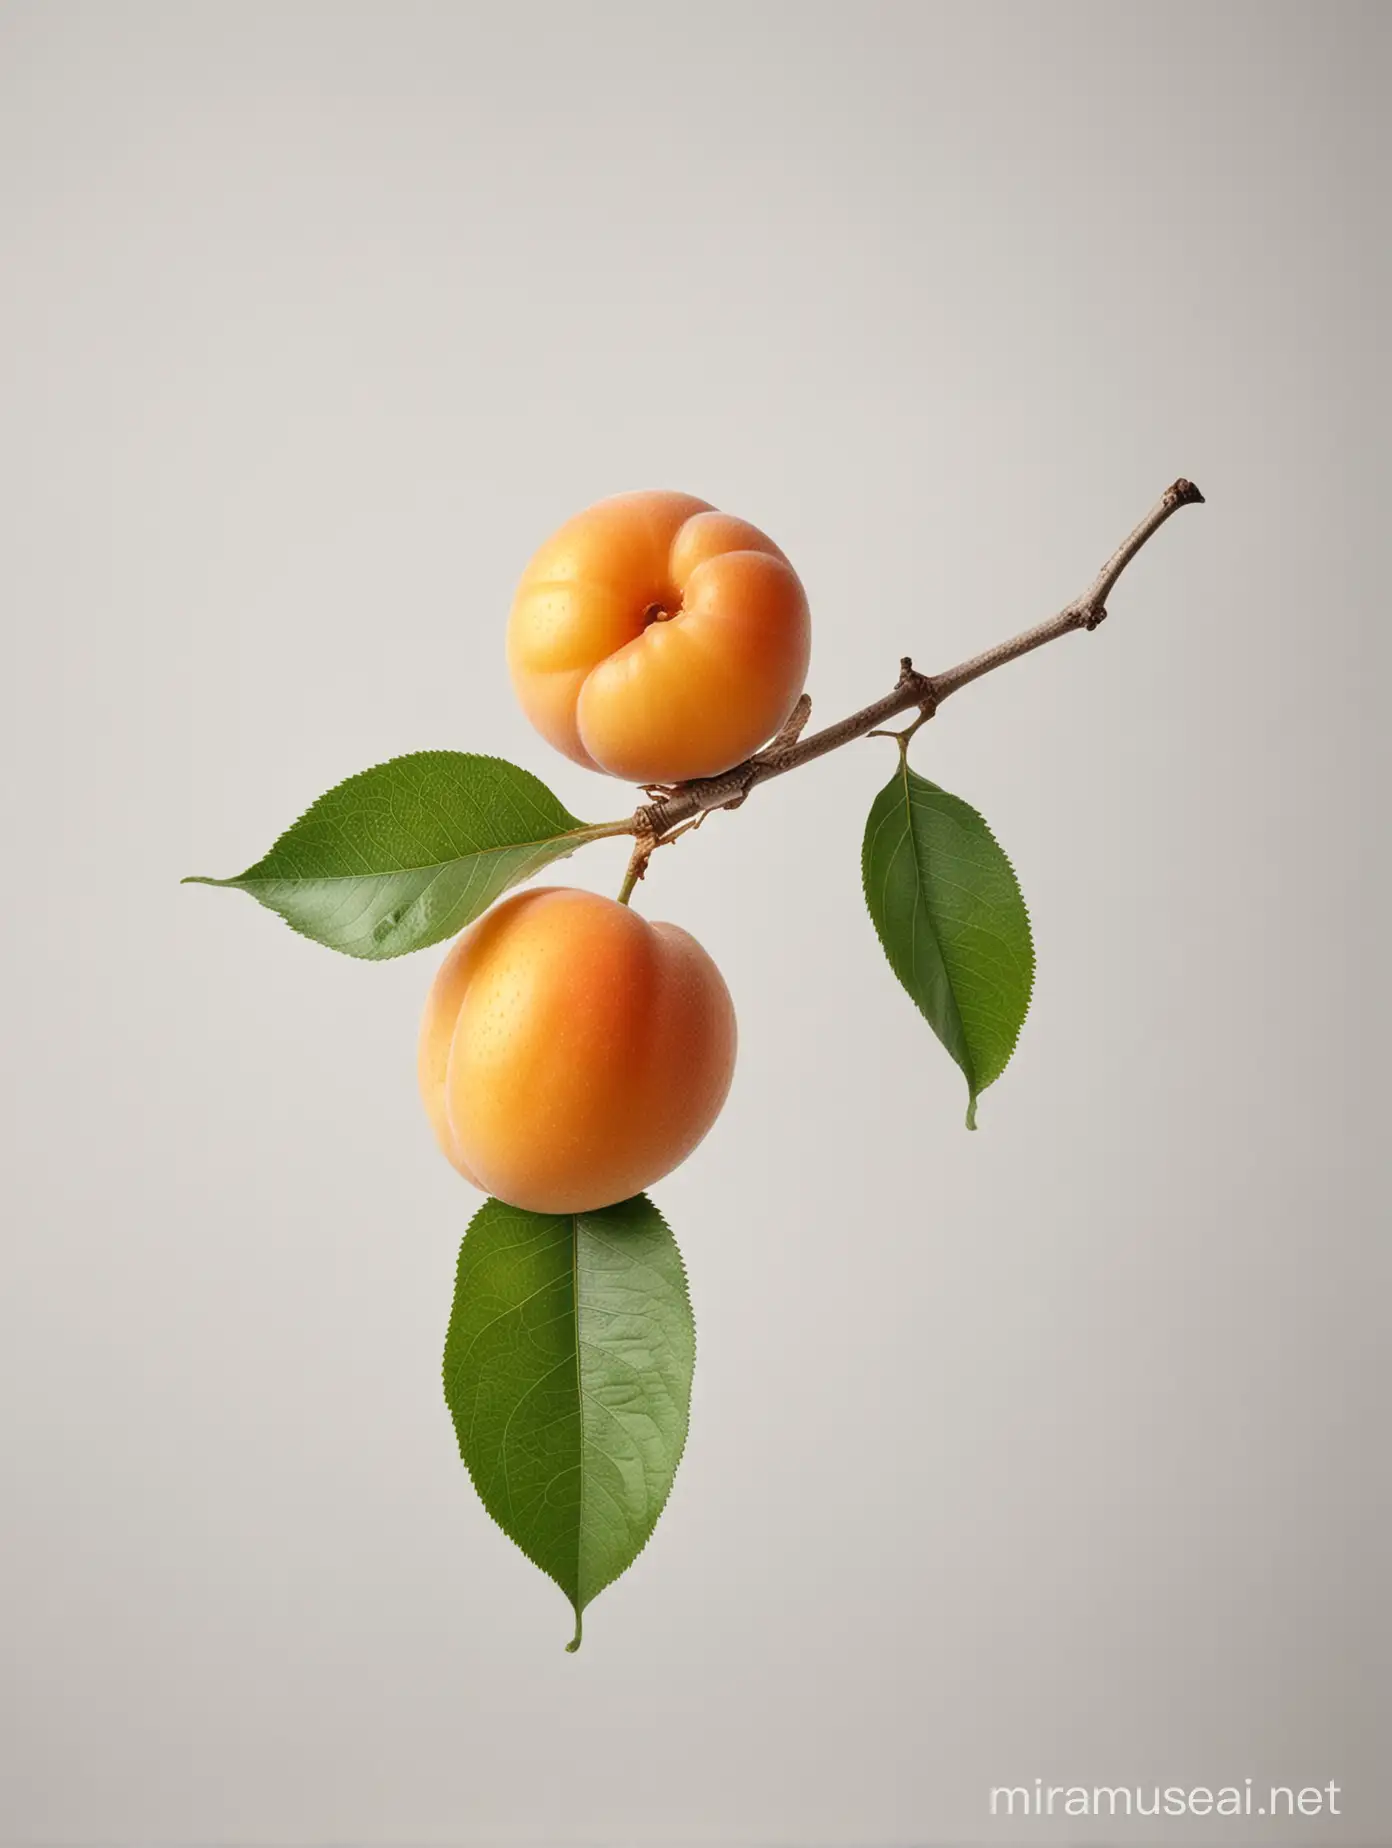 Ripe Apricot with Vibrant Leaf on White Background